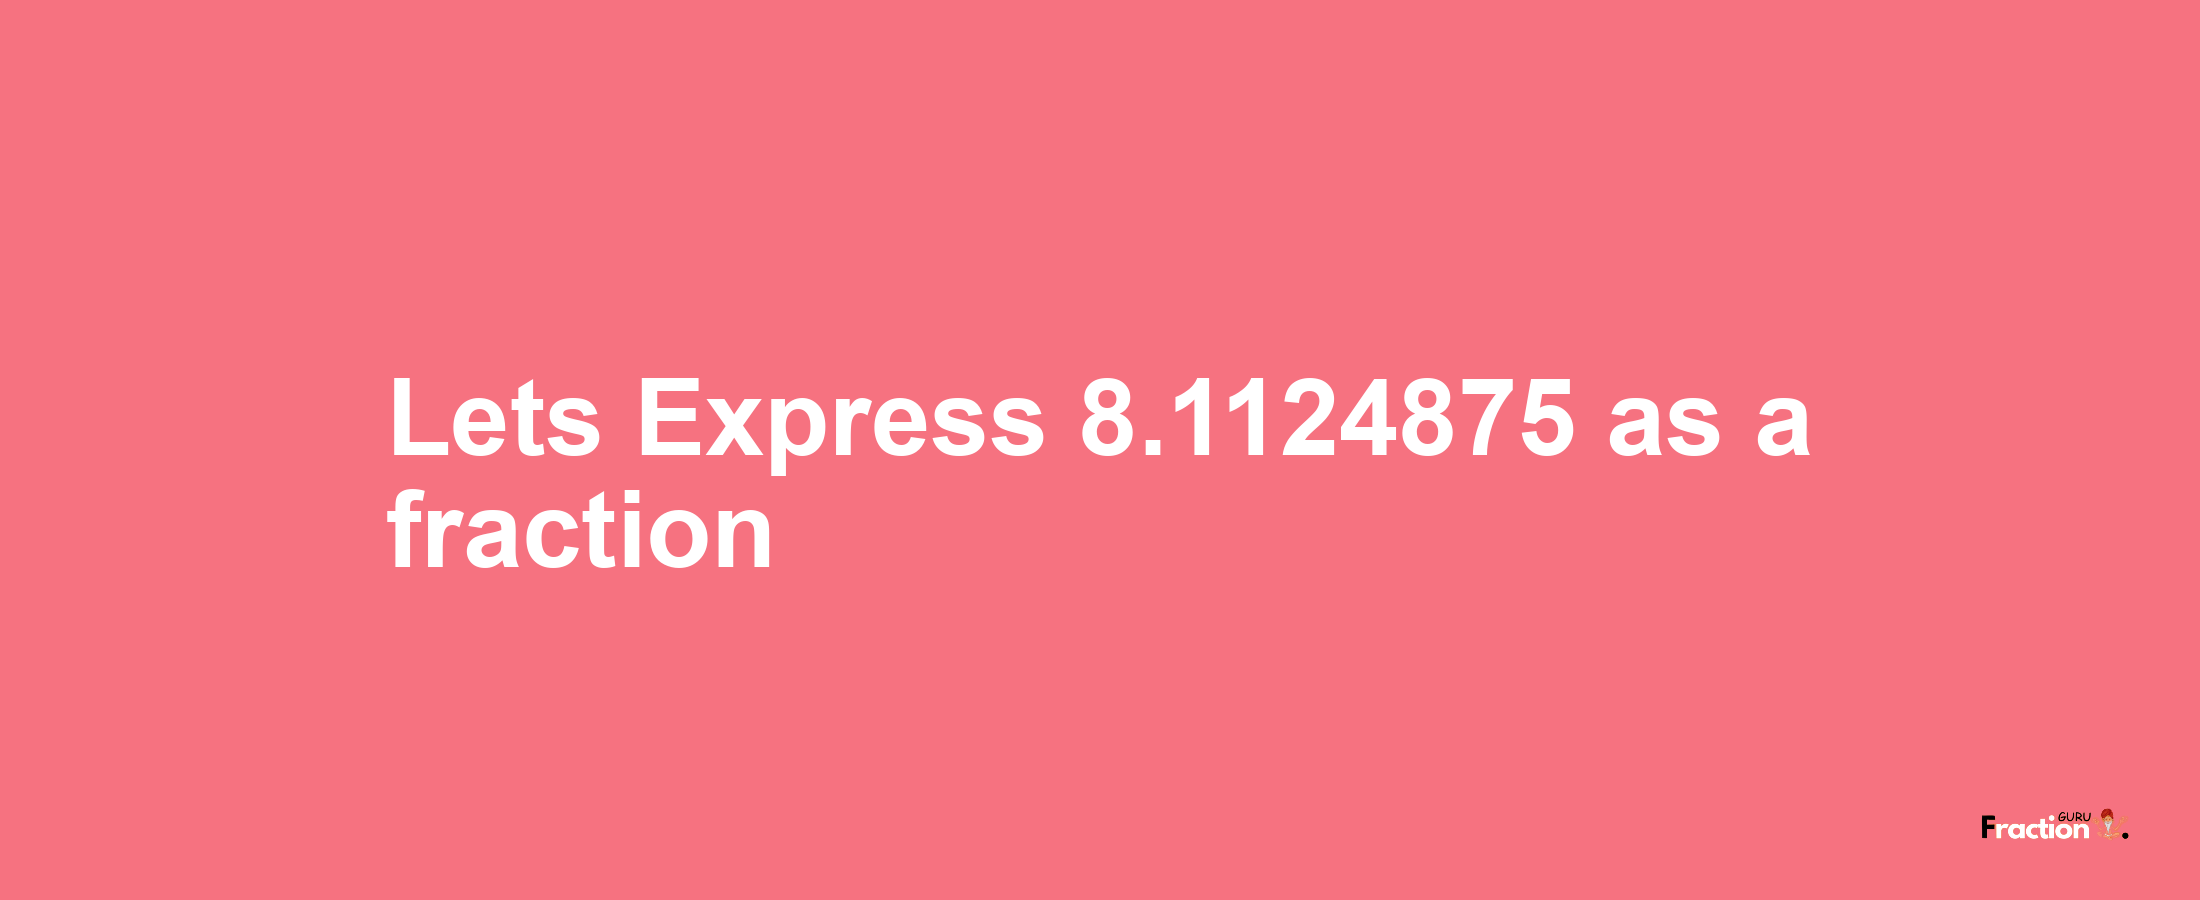 Lets Express 8.1124875 as afraction